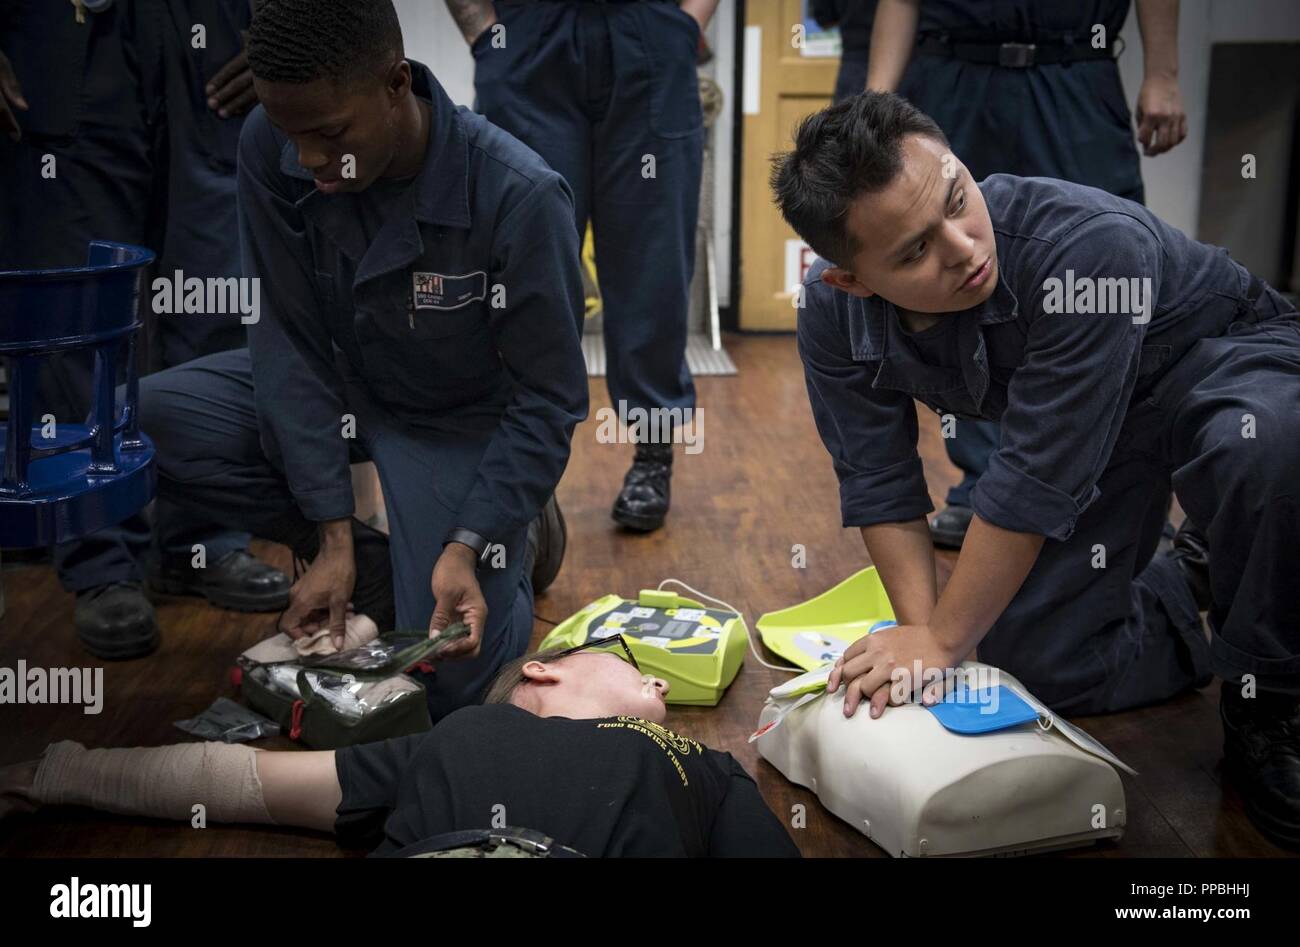 SEA (Aug. 28, 2018) Sailors participate in a medical training exercise aboard the Arleigh Burke-class guided-missile destroyer USS Carney (DDG 64) Aug. 28, 2018. Carney, forward-deployed to Rota, Spain, is on its fifth patrol in the U.S. 6th Fleet area of operations in support of regional allies and partners as well as U.S. national security interests in Europe and Africa. Stock Photo